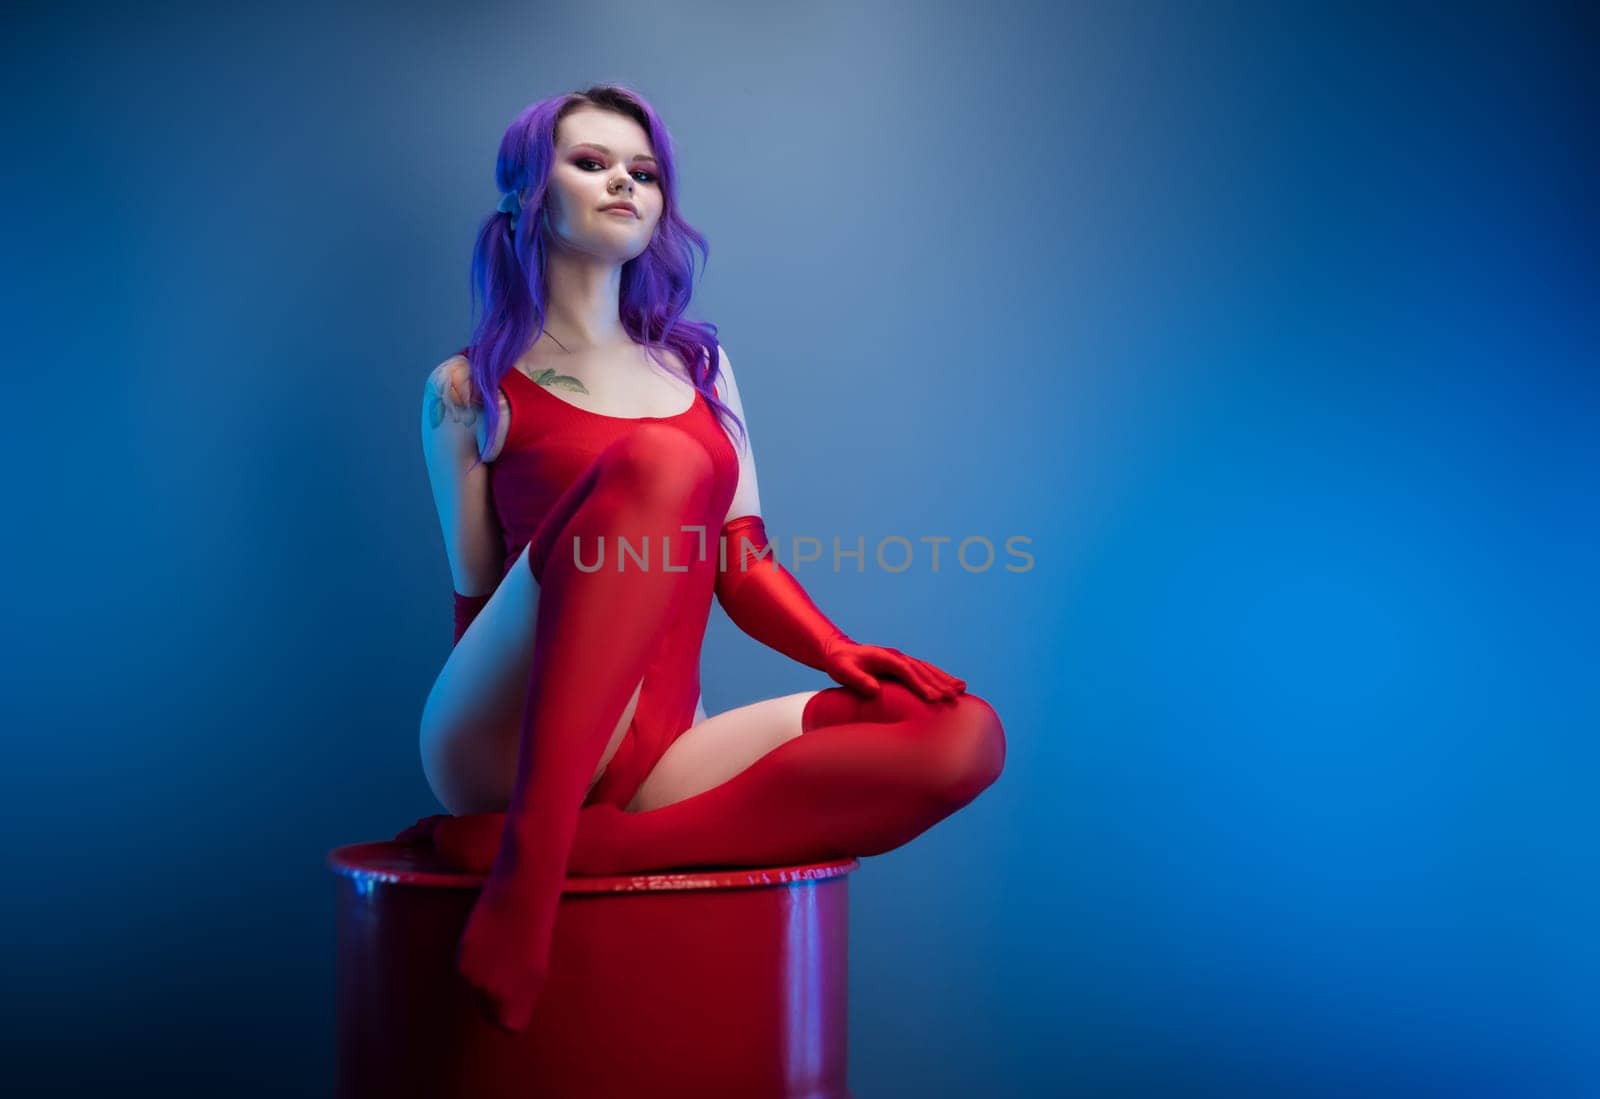 sexy girl in a red bodysuit, stockings and red gloves poses erotically on a blue background of a copy paste by Rotozey